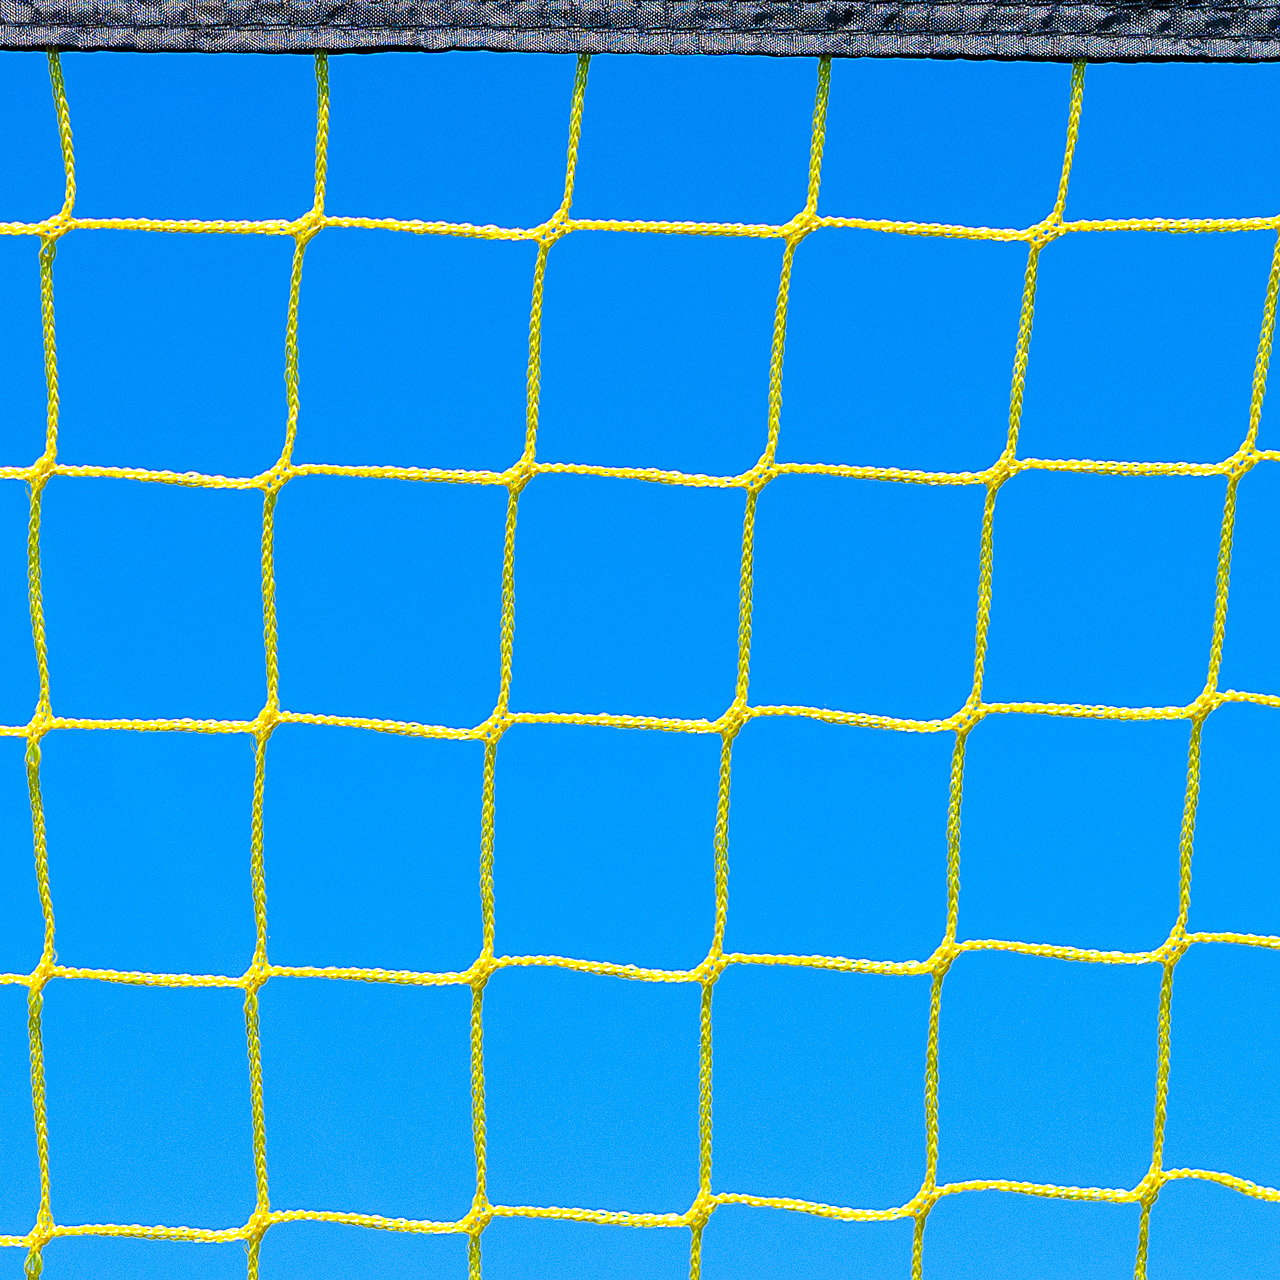 FORZA FLASH Square Pop-Up Soccer Goal [1.2m X 0.9m]